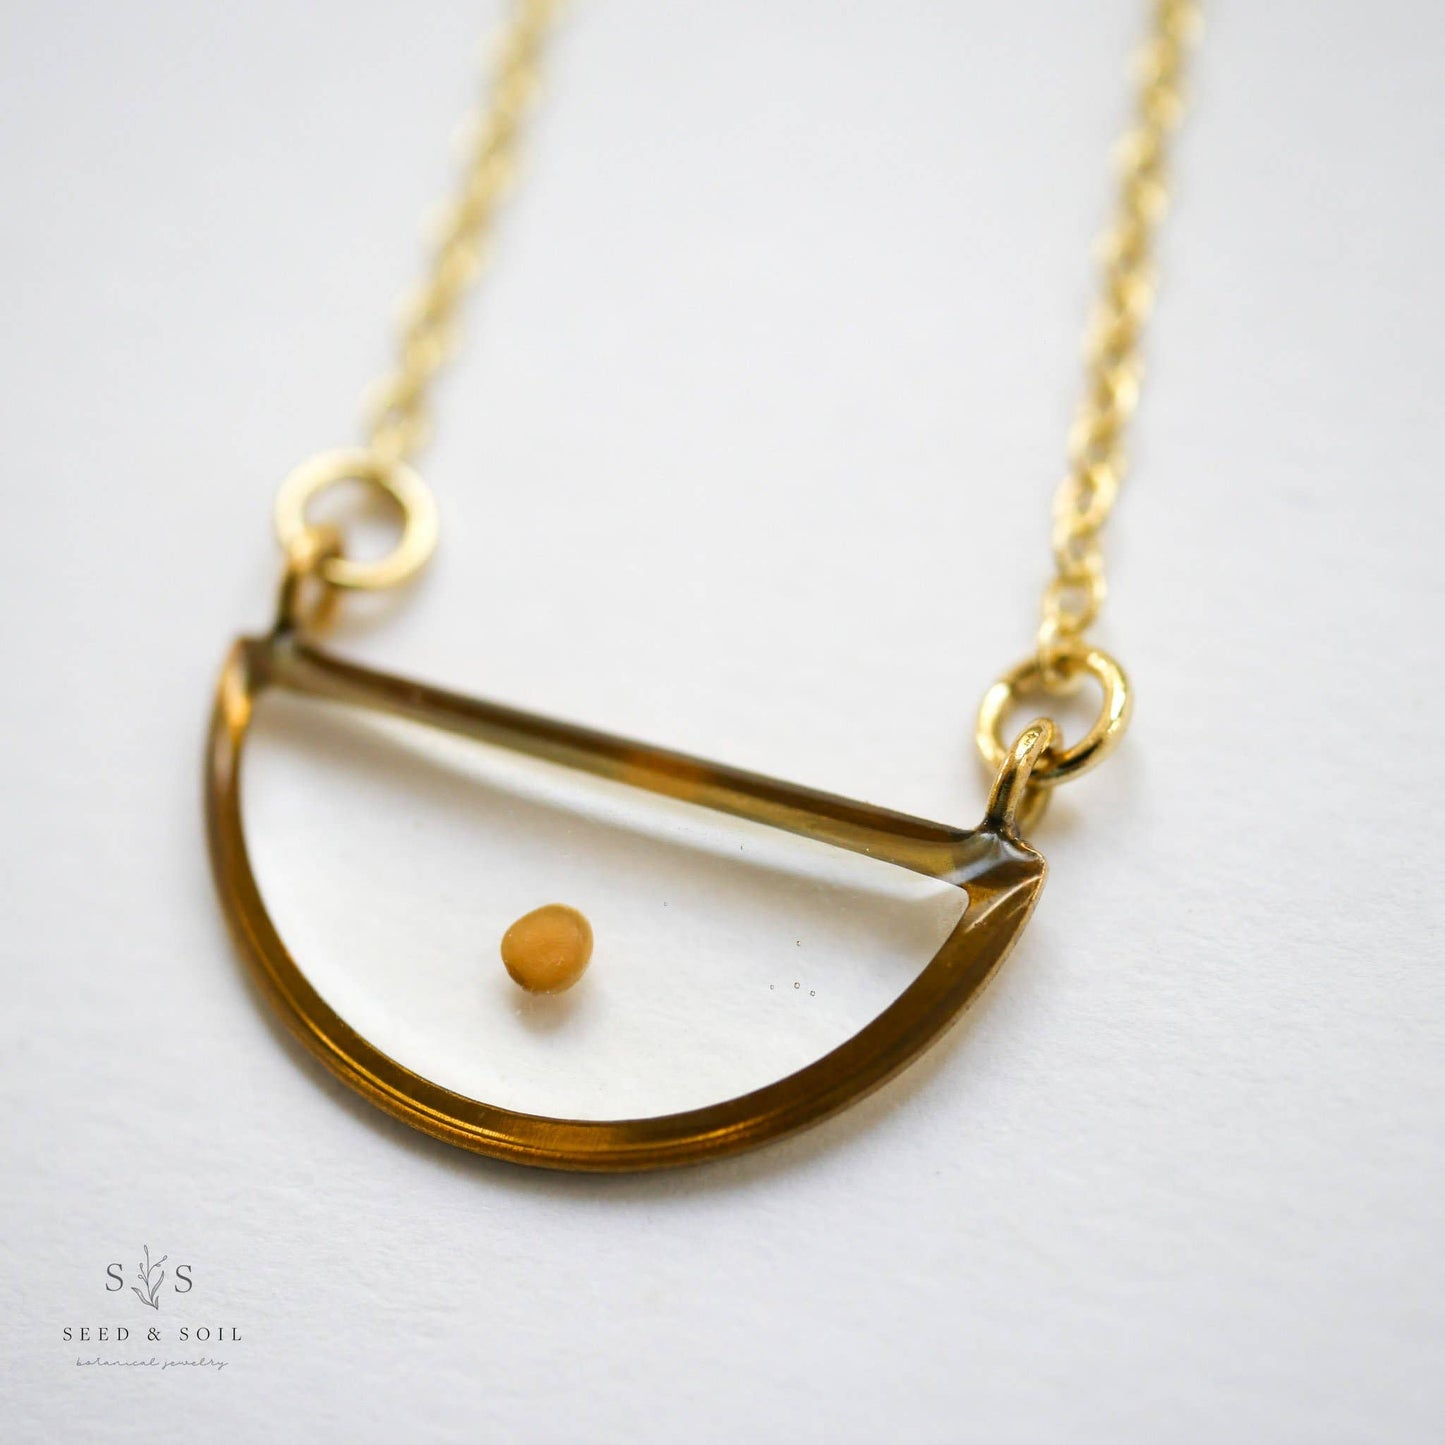 Mustard Seed Necklace - Demi Lune Faith Jewelry